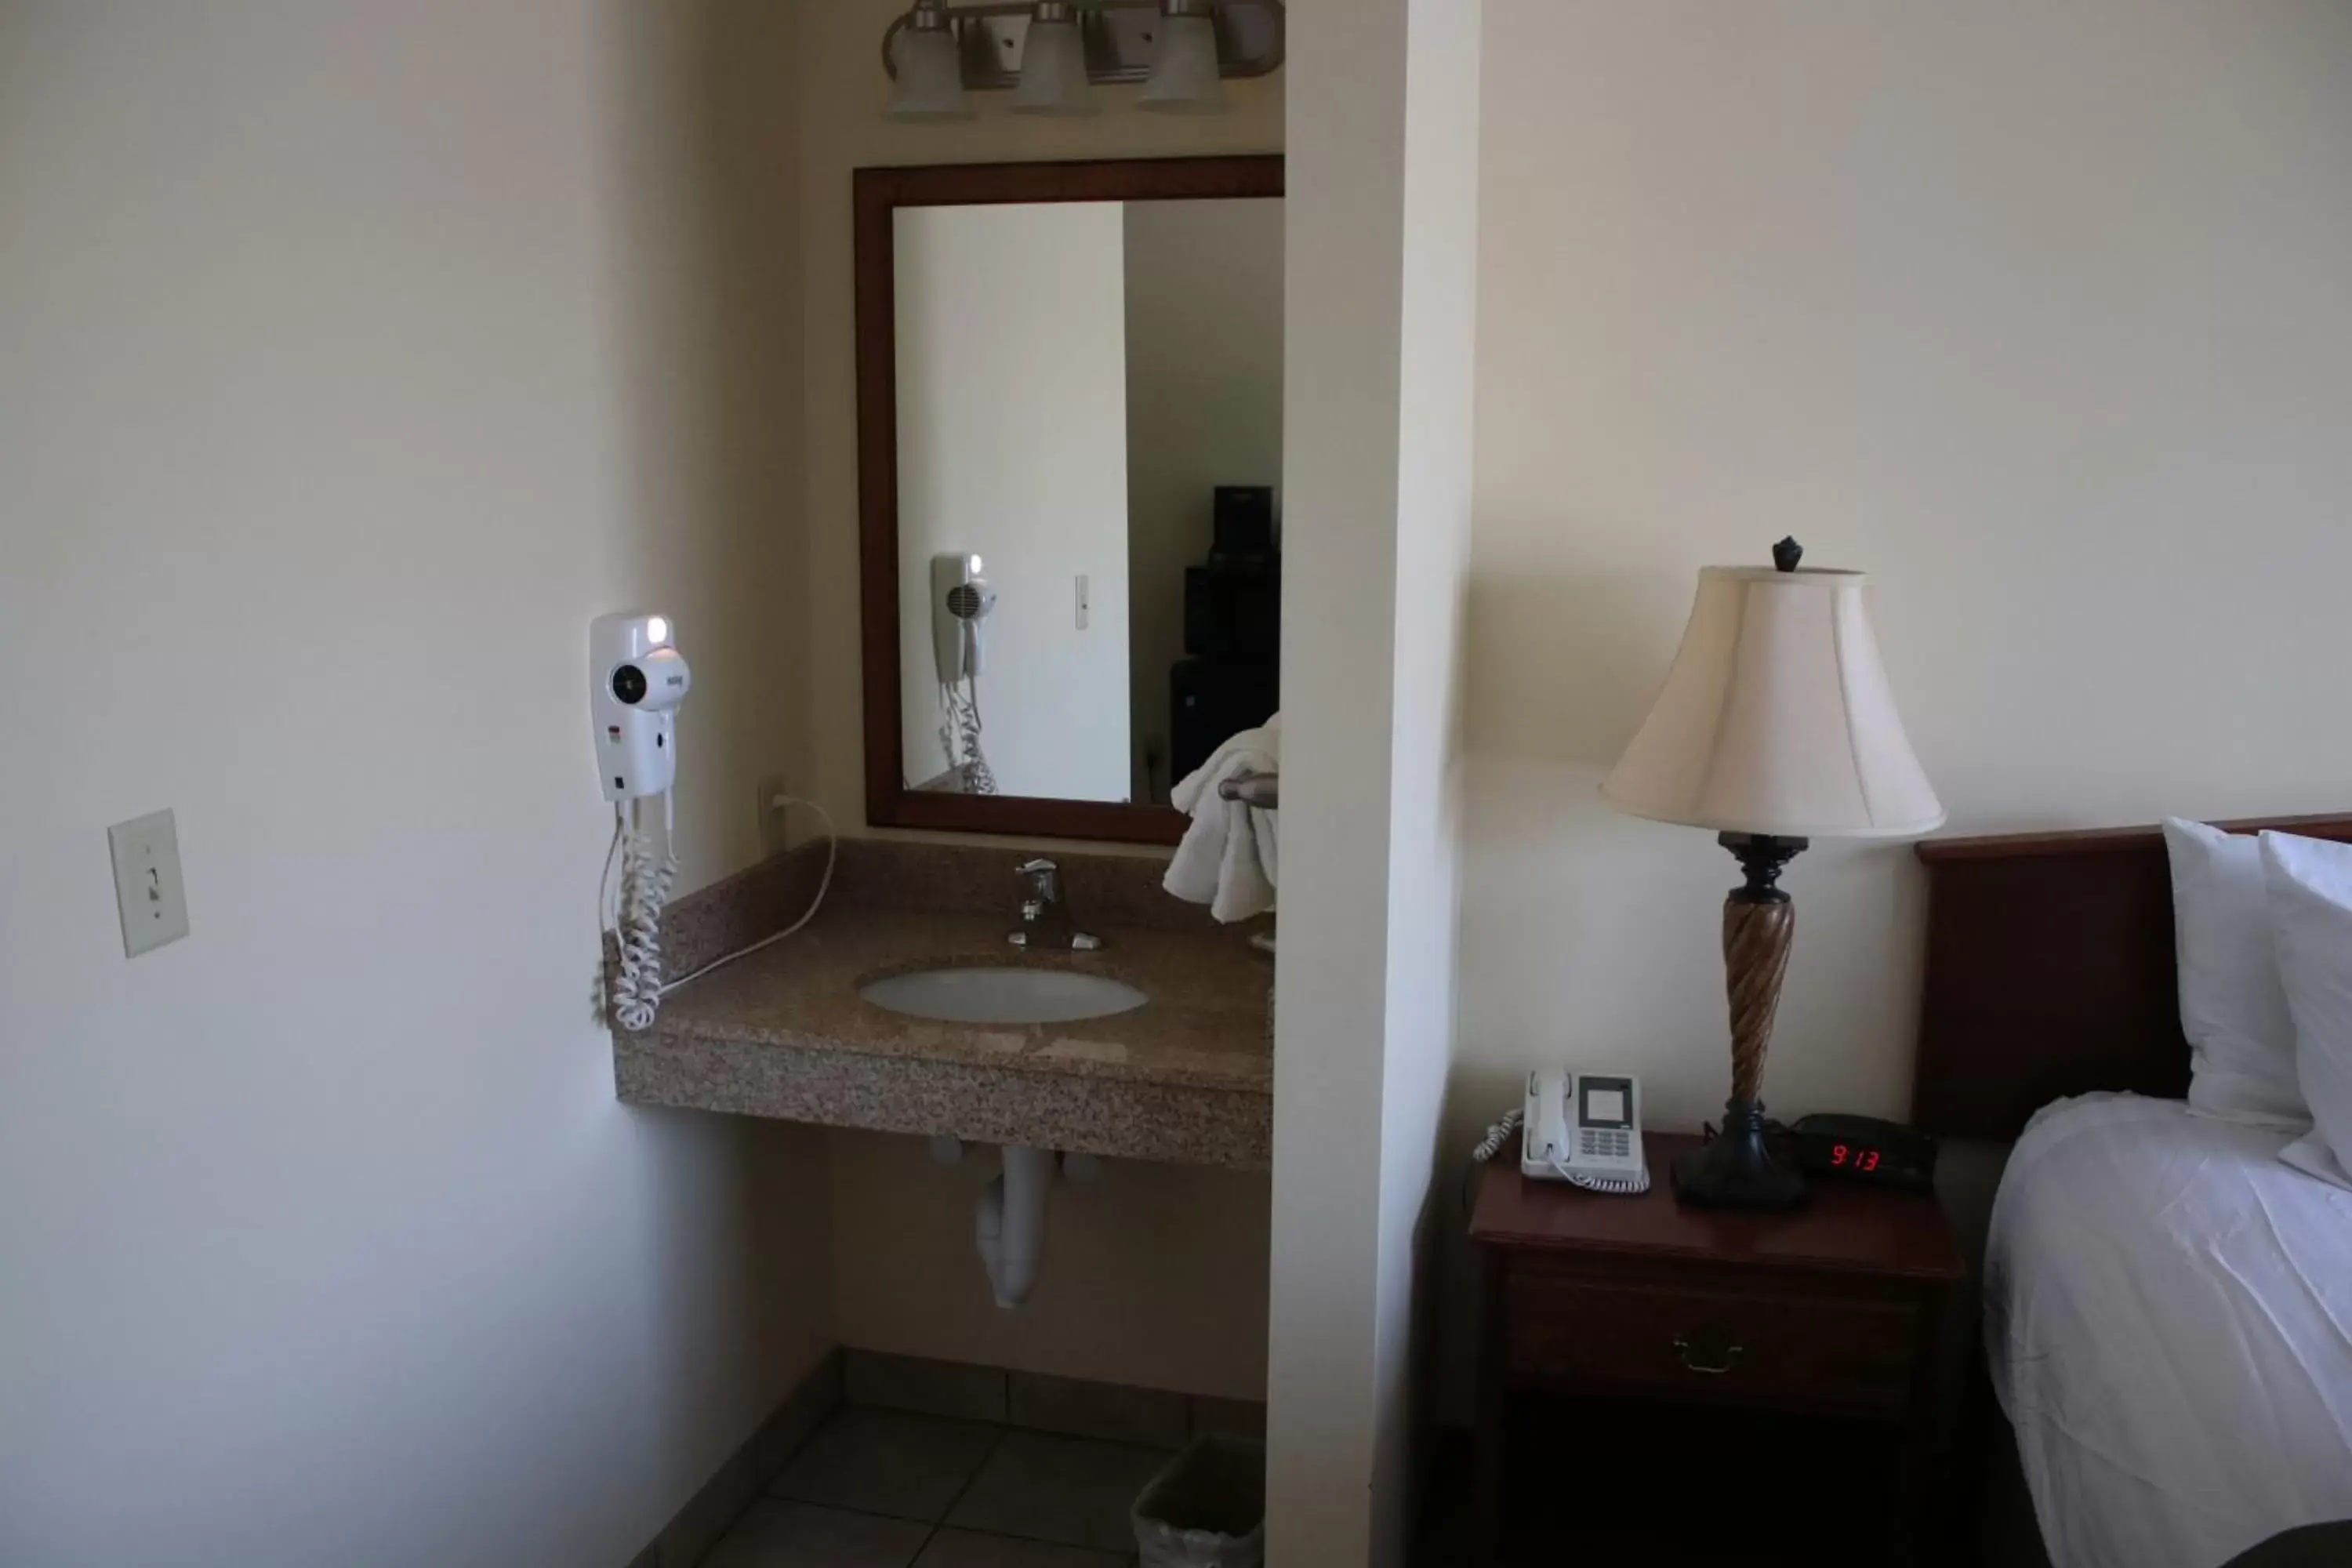 Bathroom in The Edgewood Hotel and Suites